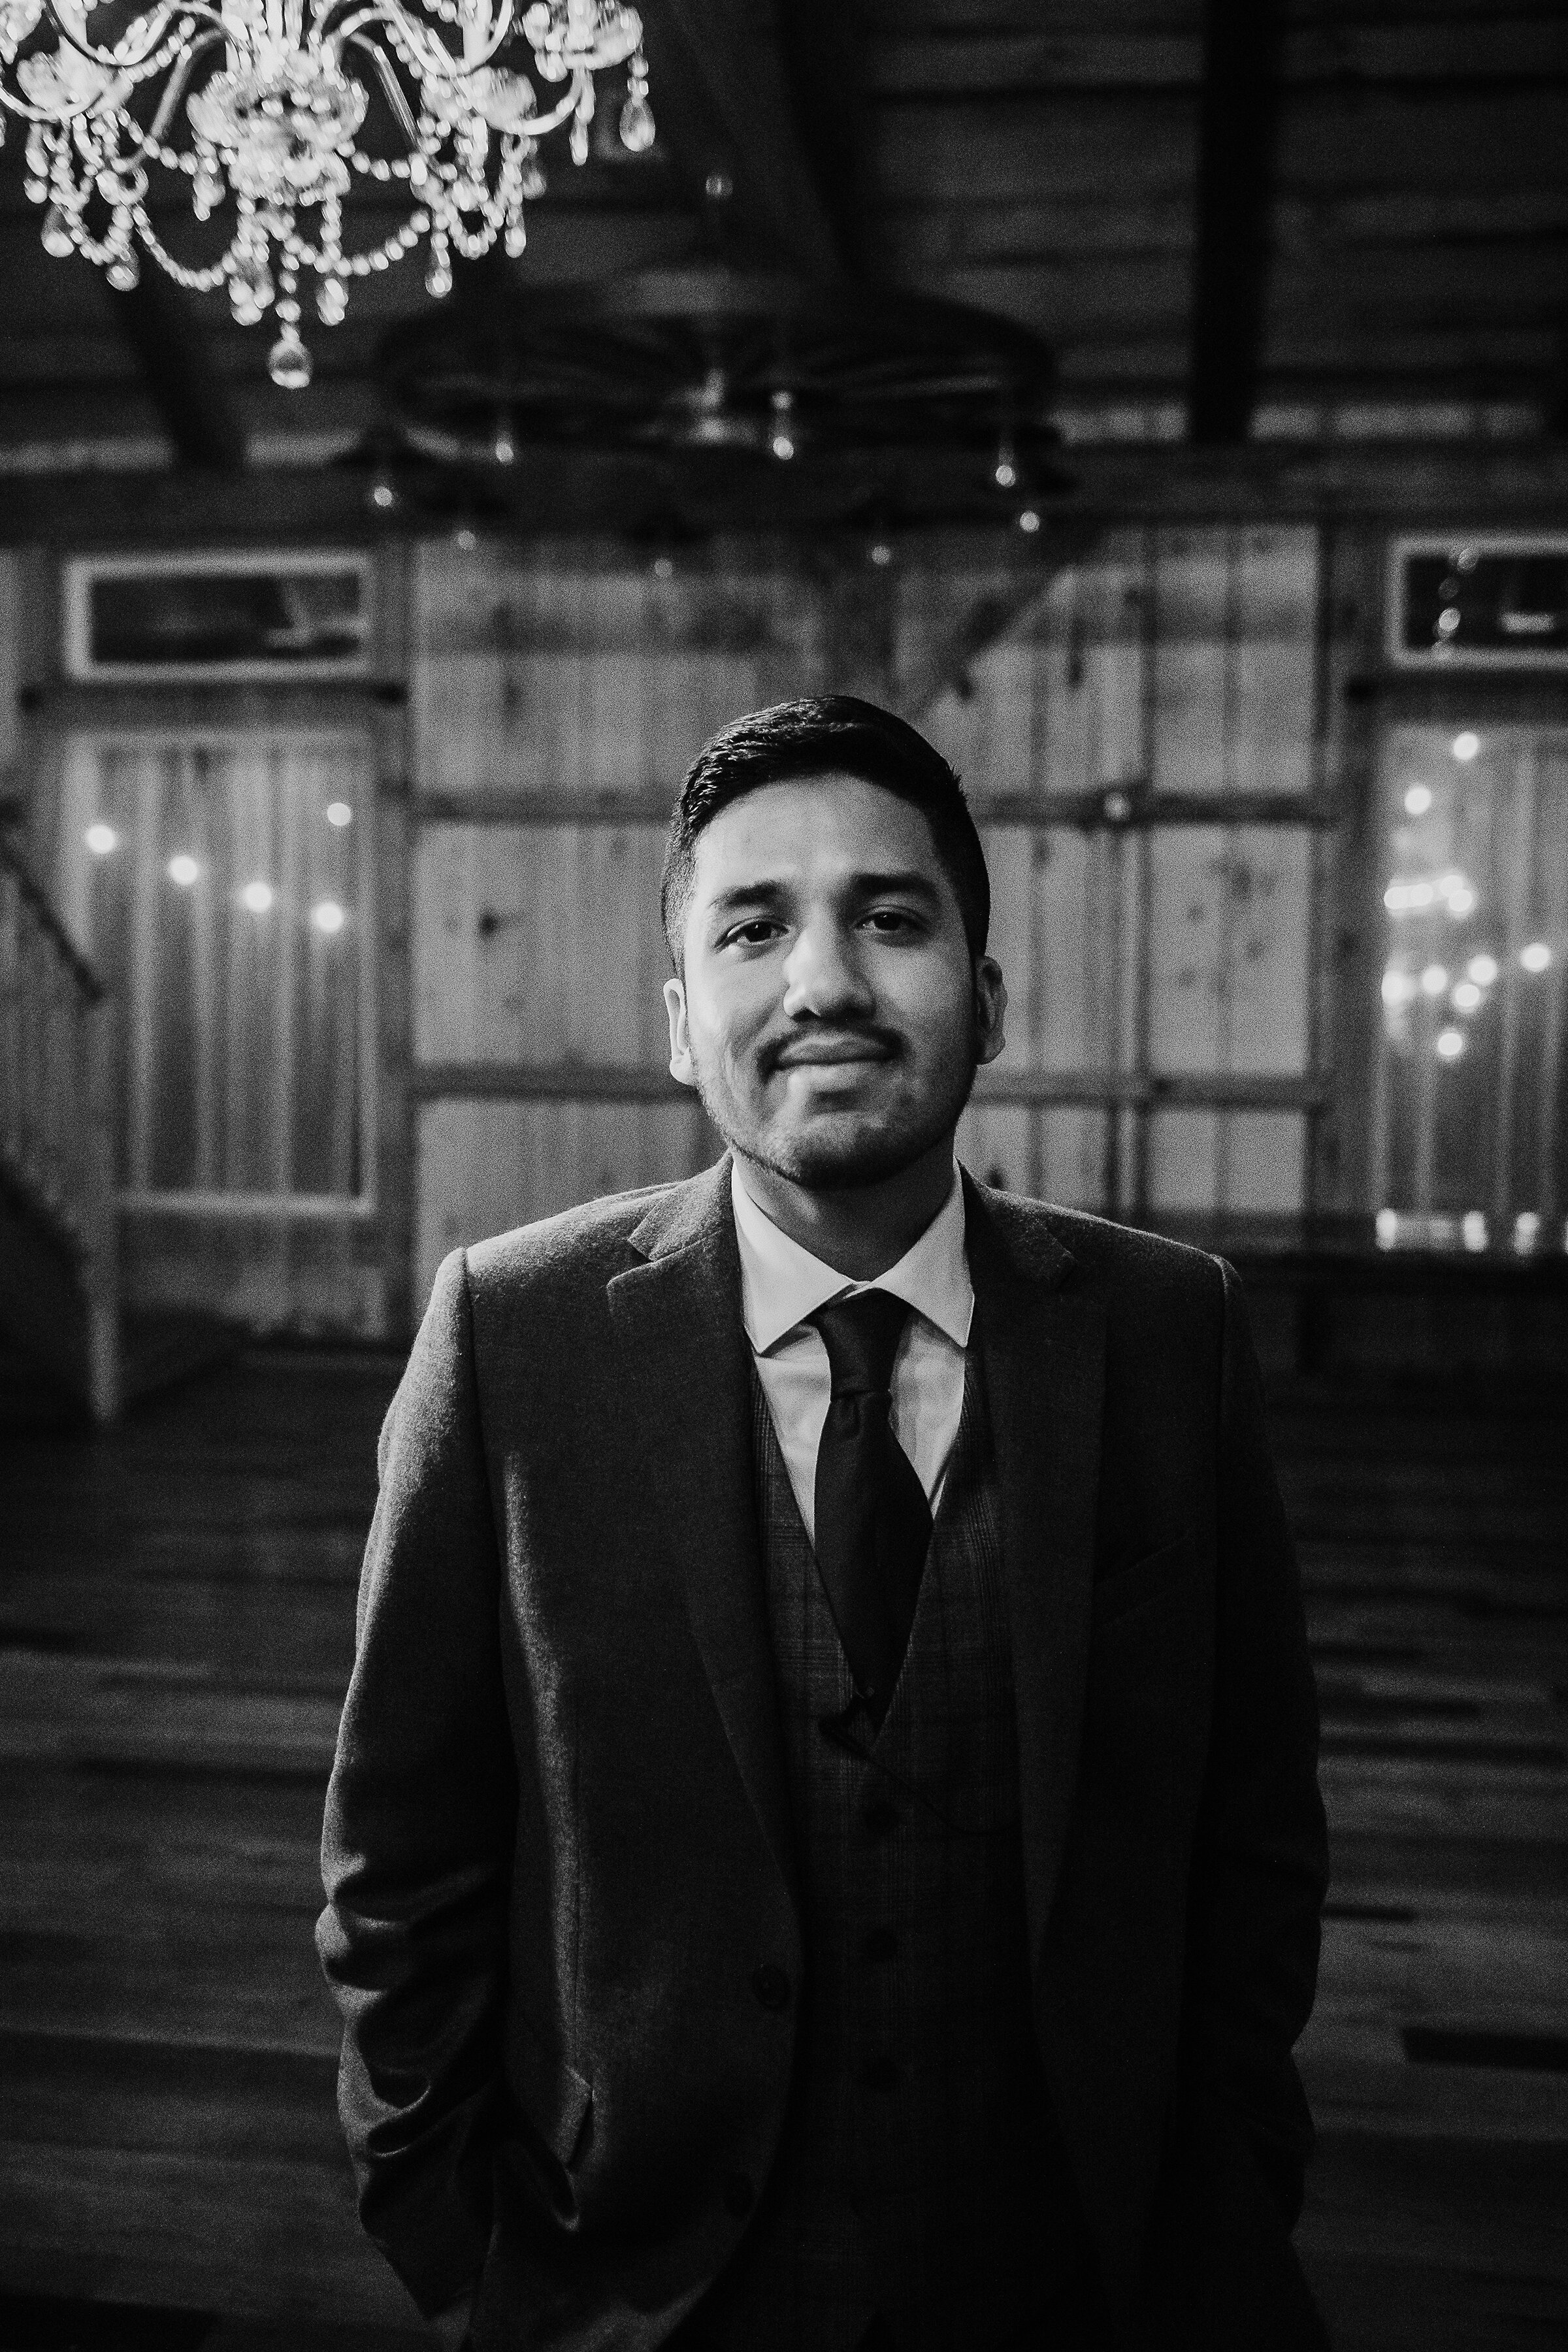  Kindred + Co. Photography captures this eager groom moments before tying the knot at this treehouse elopement at the Grand Barn at the Mohicans in Akron, Ohio. black and white photo, crystal chandelier, treehouse wedding, string lights, groom, tween